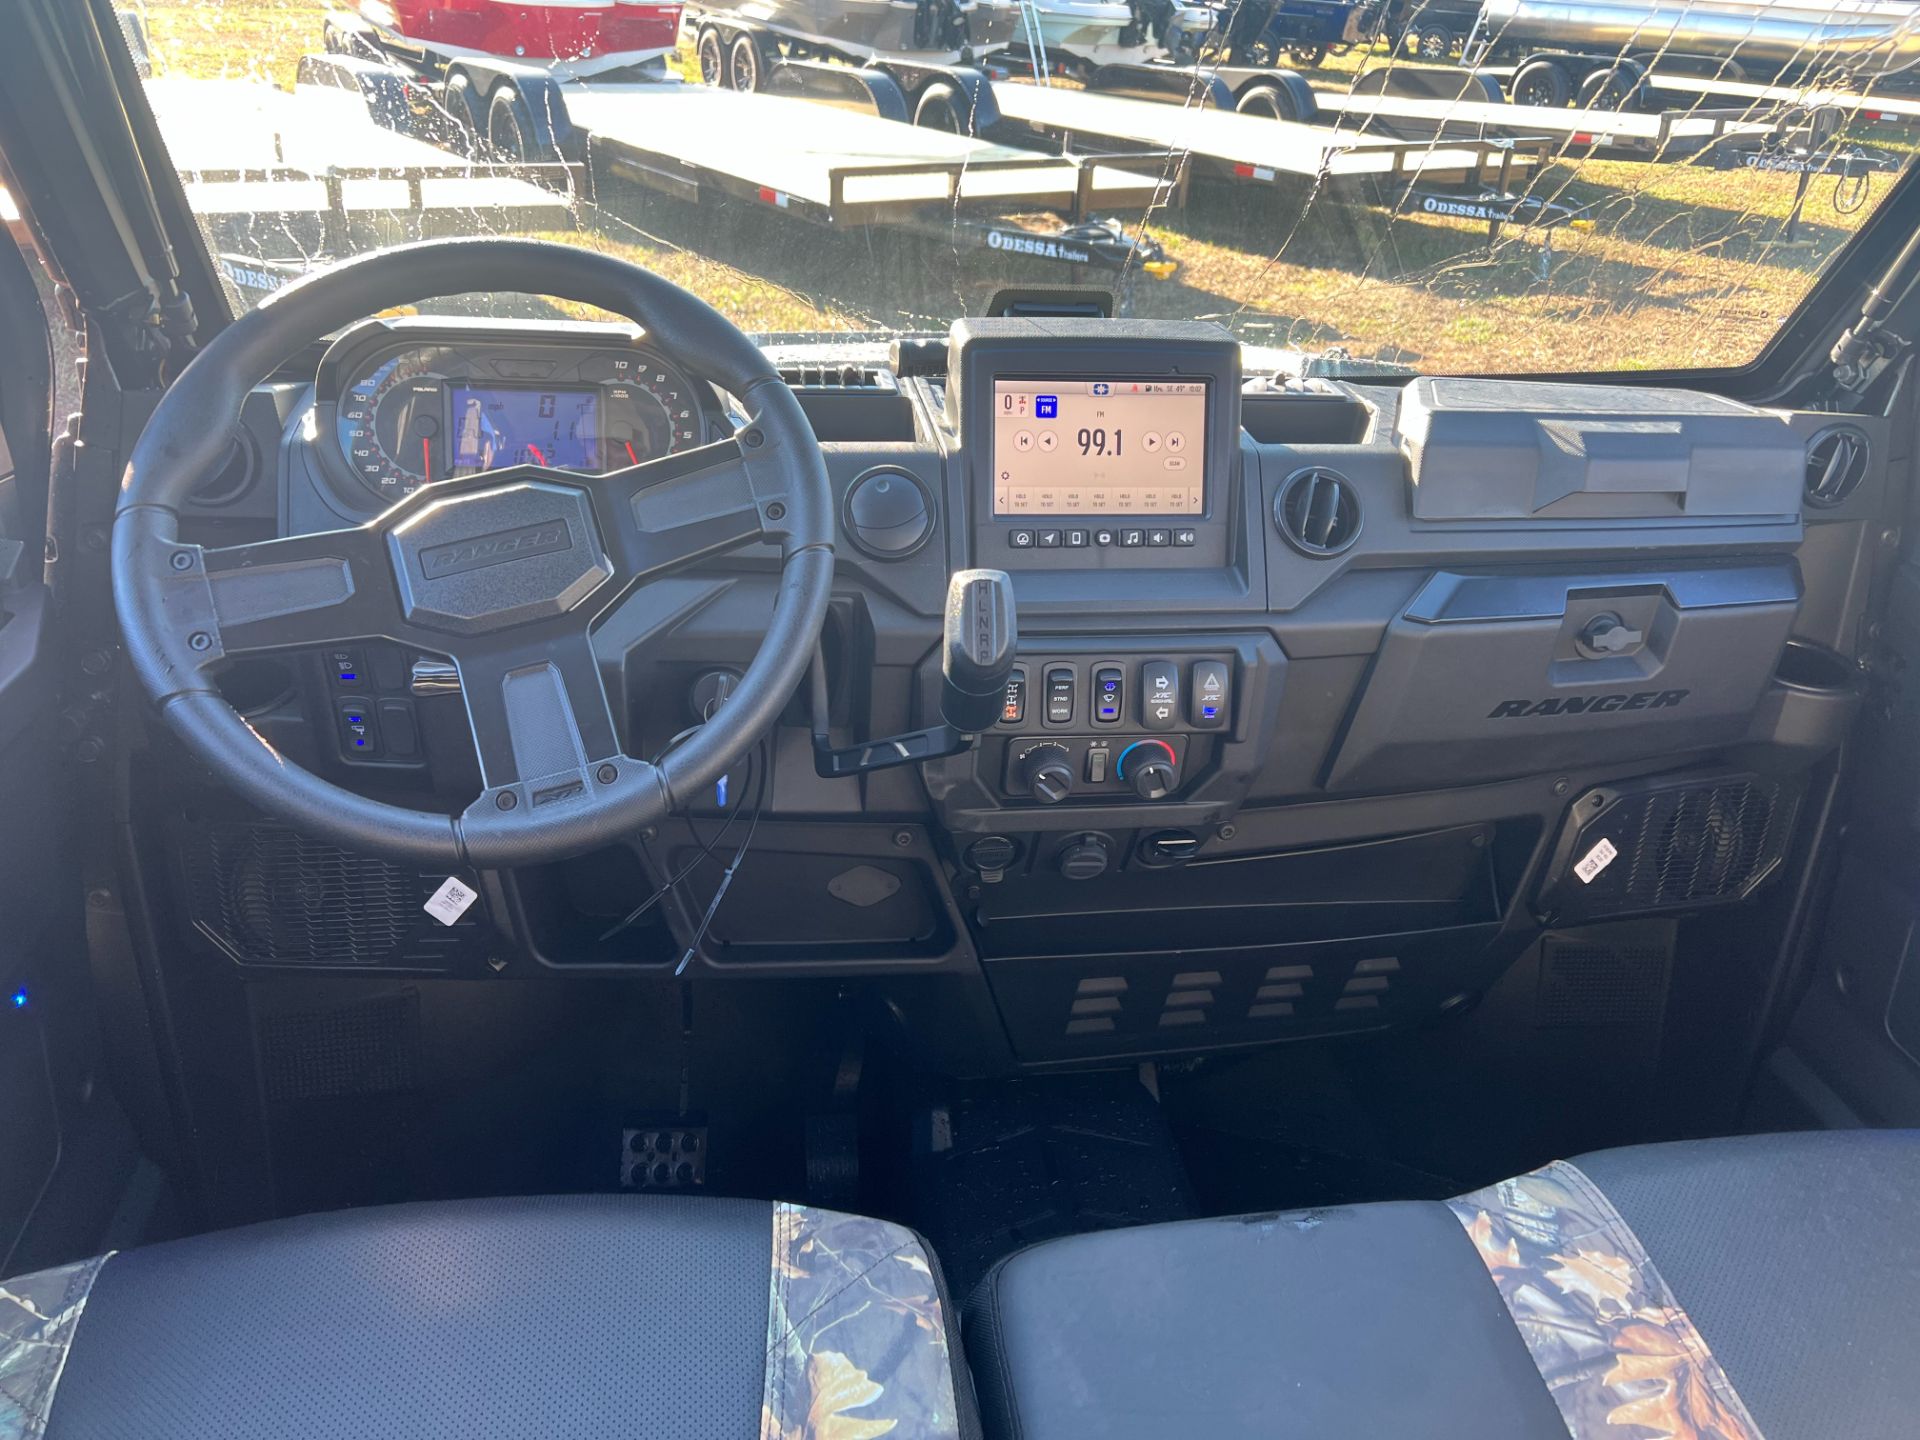 2025 Polaris Ranger Crew XP 1000 NorthStar Edition Ultimate in Ooltewah, Tennessee - Photo 7